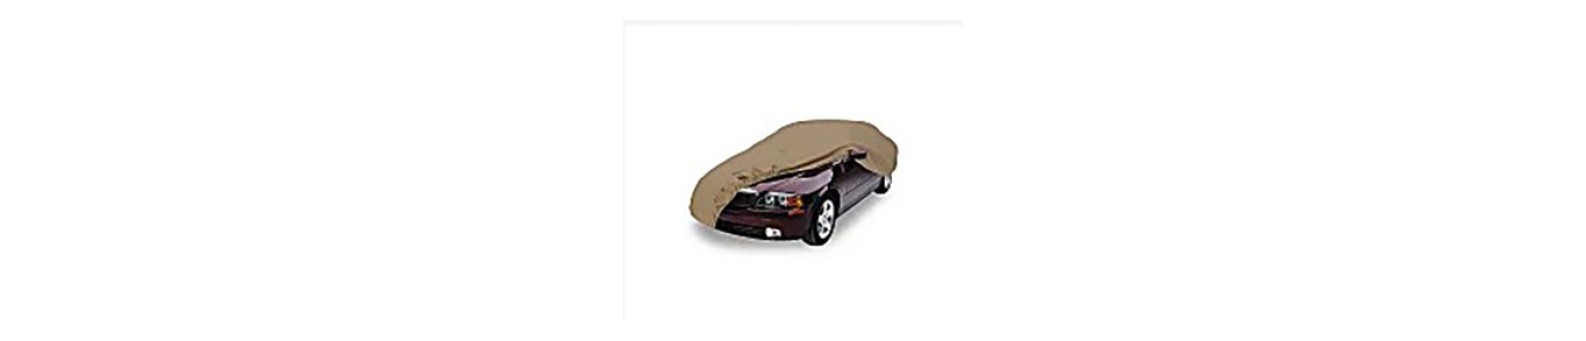 Car Body Covers